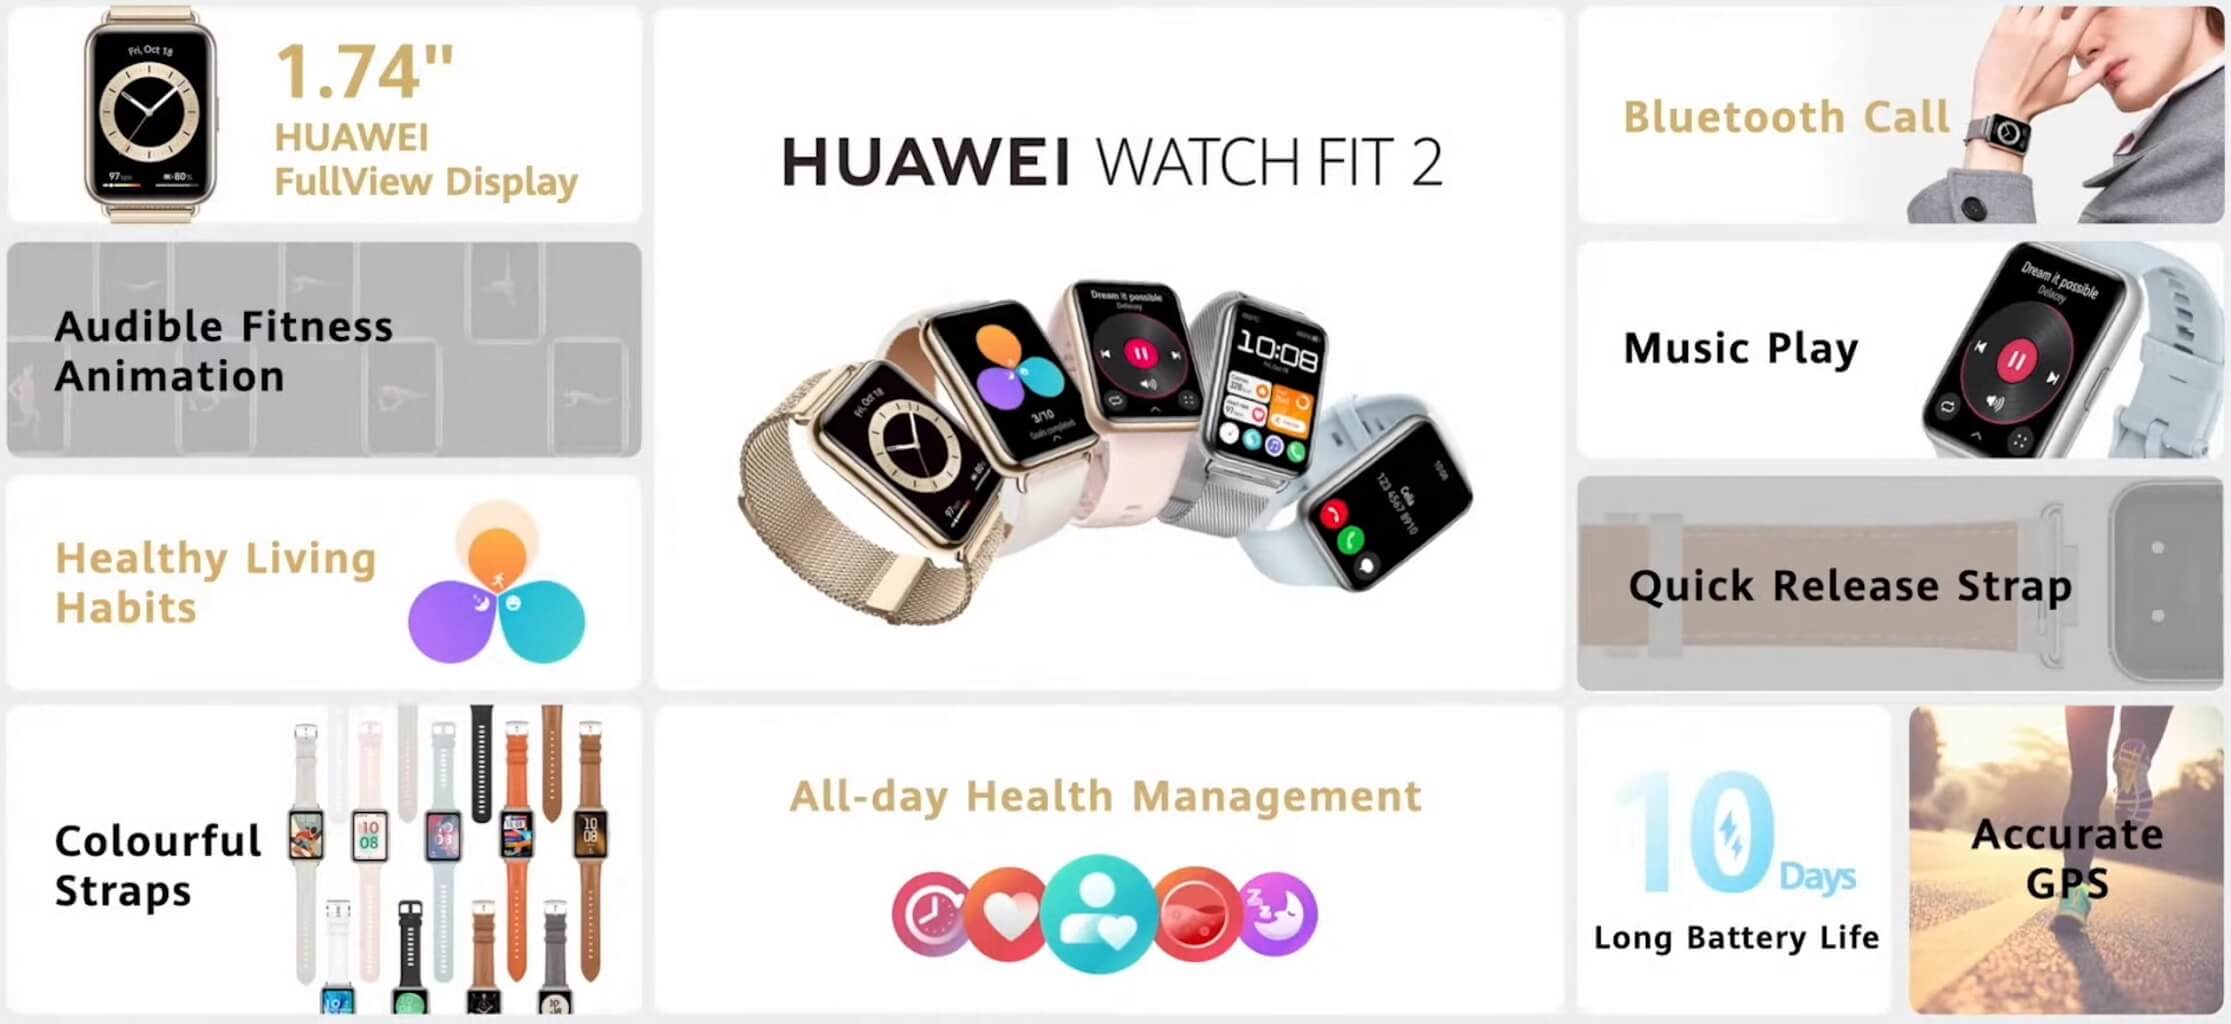 Huawei Watch Fit 2 features Global